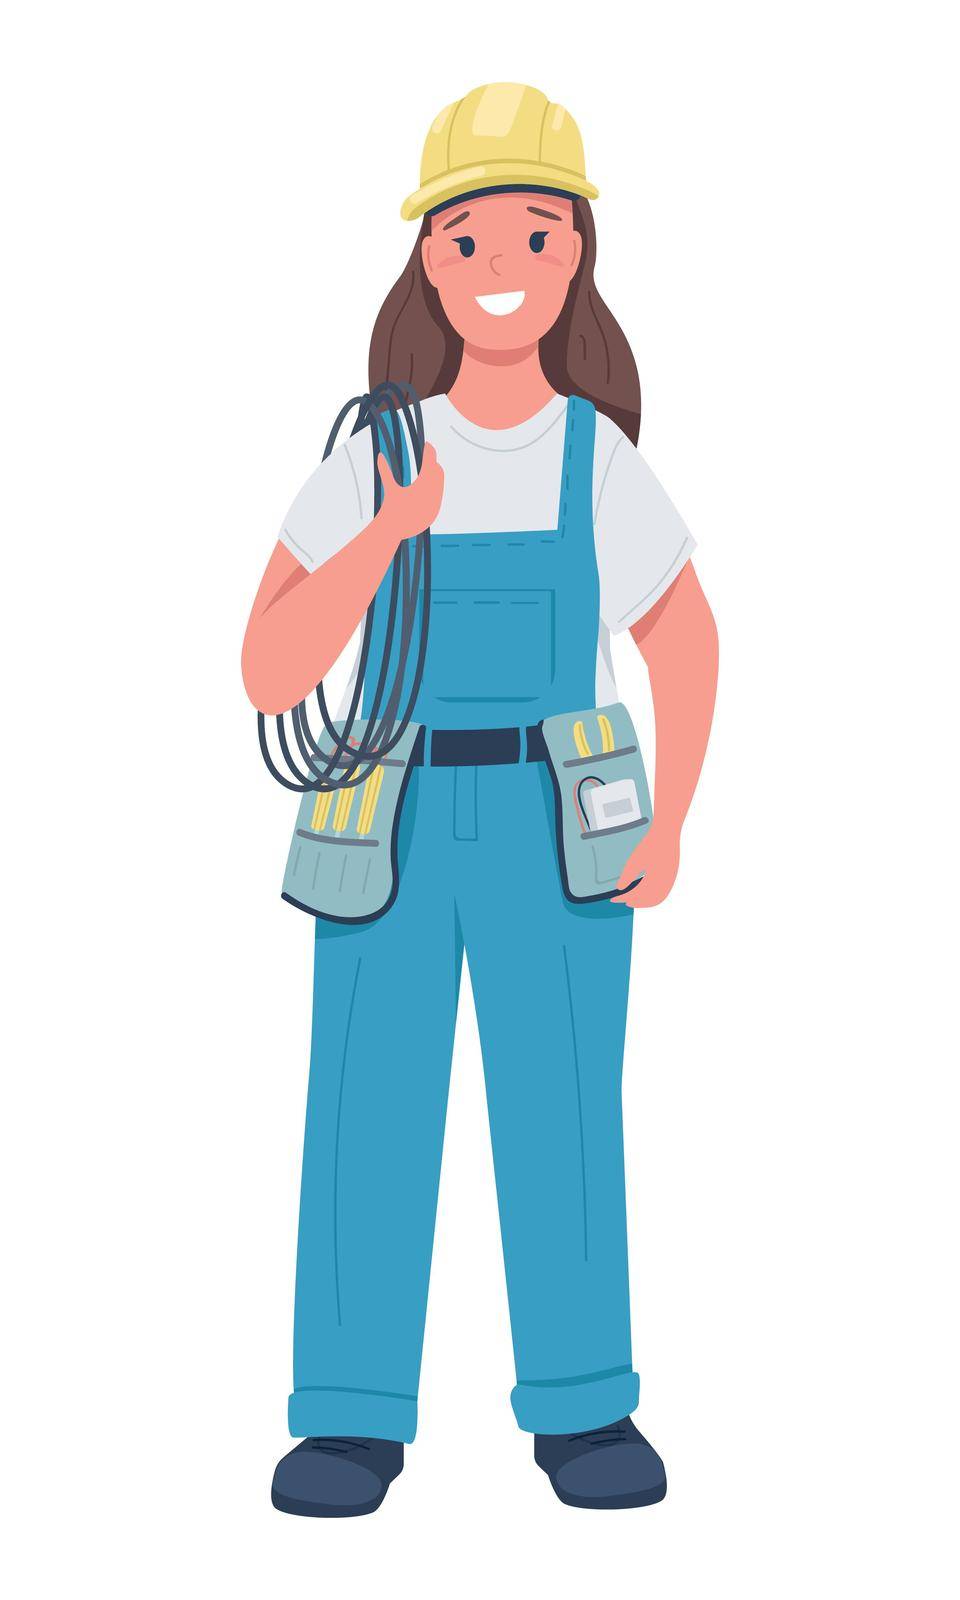 Female utility worker semi flat color vector character. Standing figure. Full body person on white. Gender equality in workplace simple cartoon style illustration for web graphic design and animation